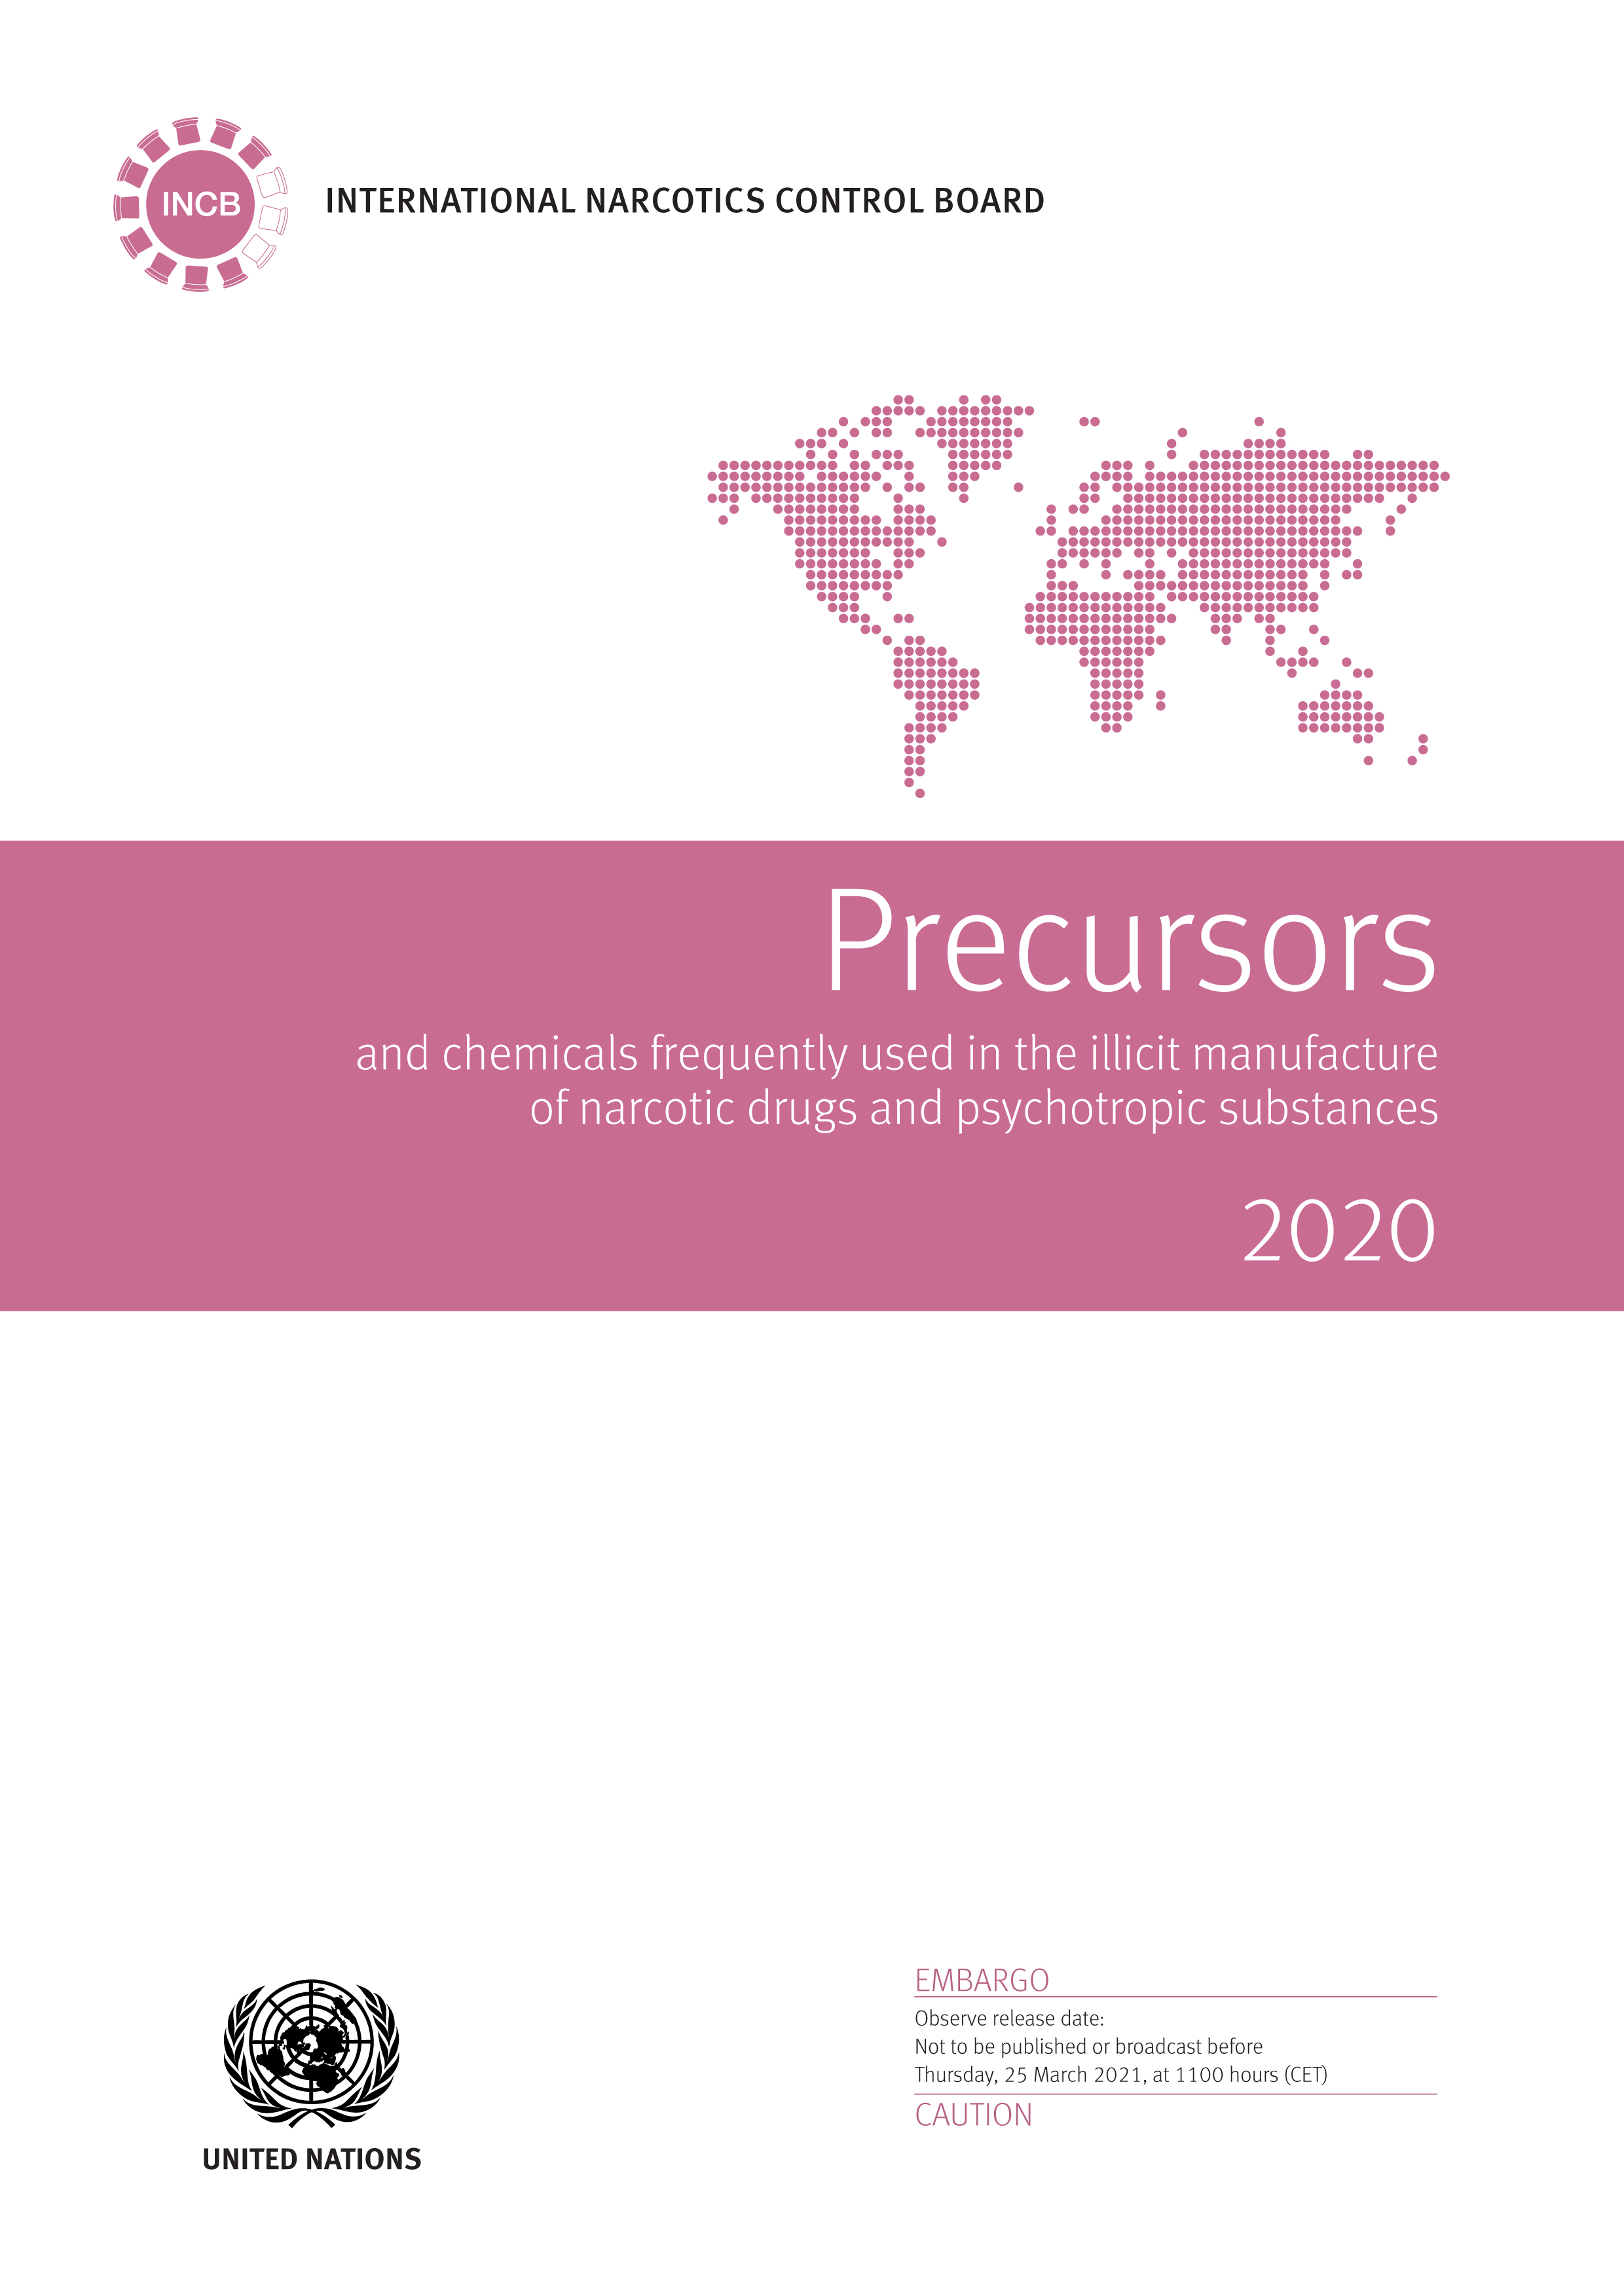 image of Seizures of substances in Tables I and II of the United Nations Convention against Illicit Traffic in Narcotic Drugs and Psychotropic Substances of 1988, as reported to the International Narcotics Control Board, 2015–2019